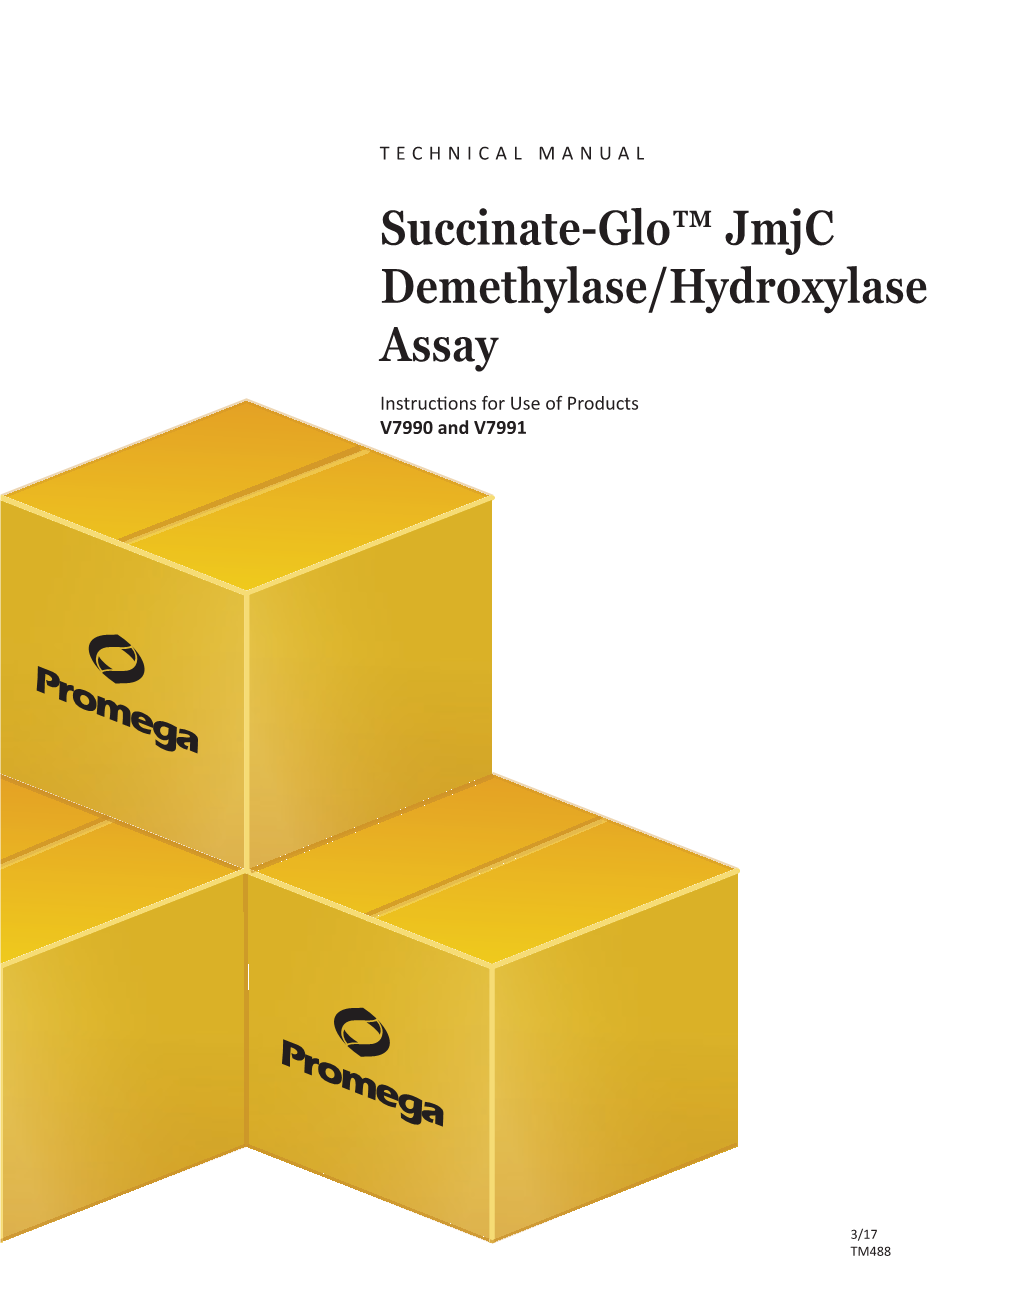 Succinate-Glo™ Jmjc Demethylase/Hydroxylase Assay Instructions for Use of Products V7990 and V7991